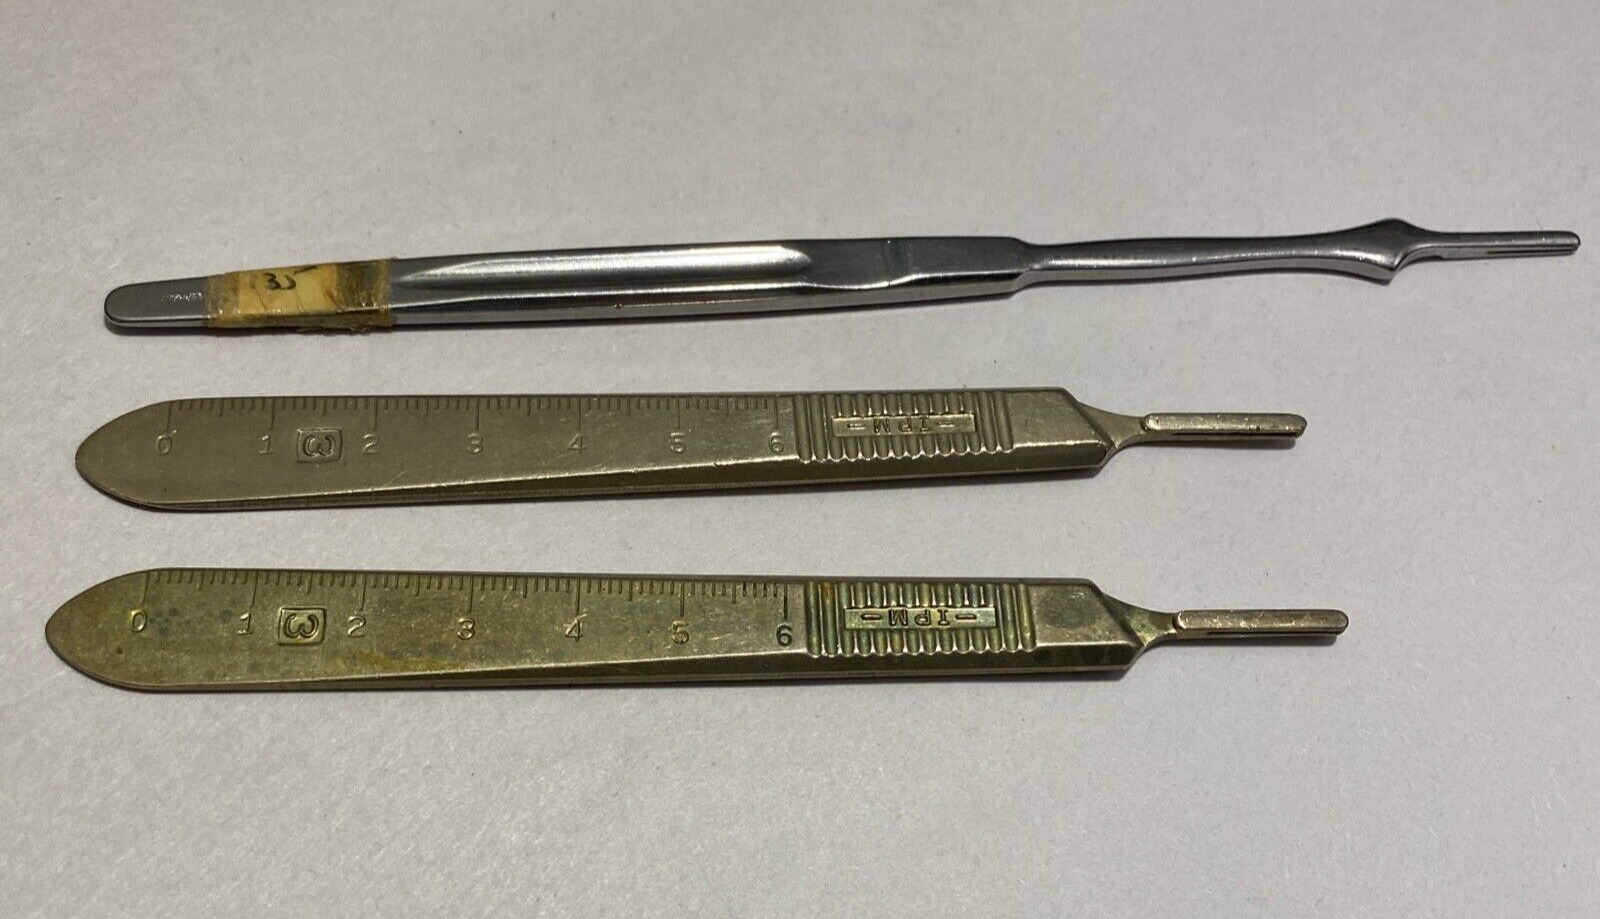 3x Surgical Knife Scalpel Handle Collectible Vintage Medical Instrument Tool